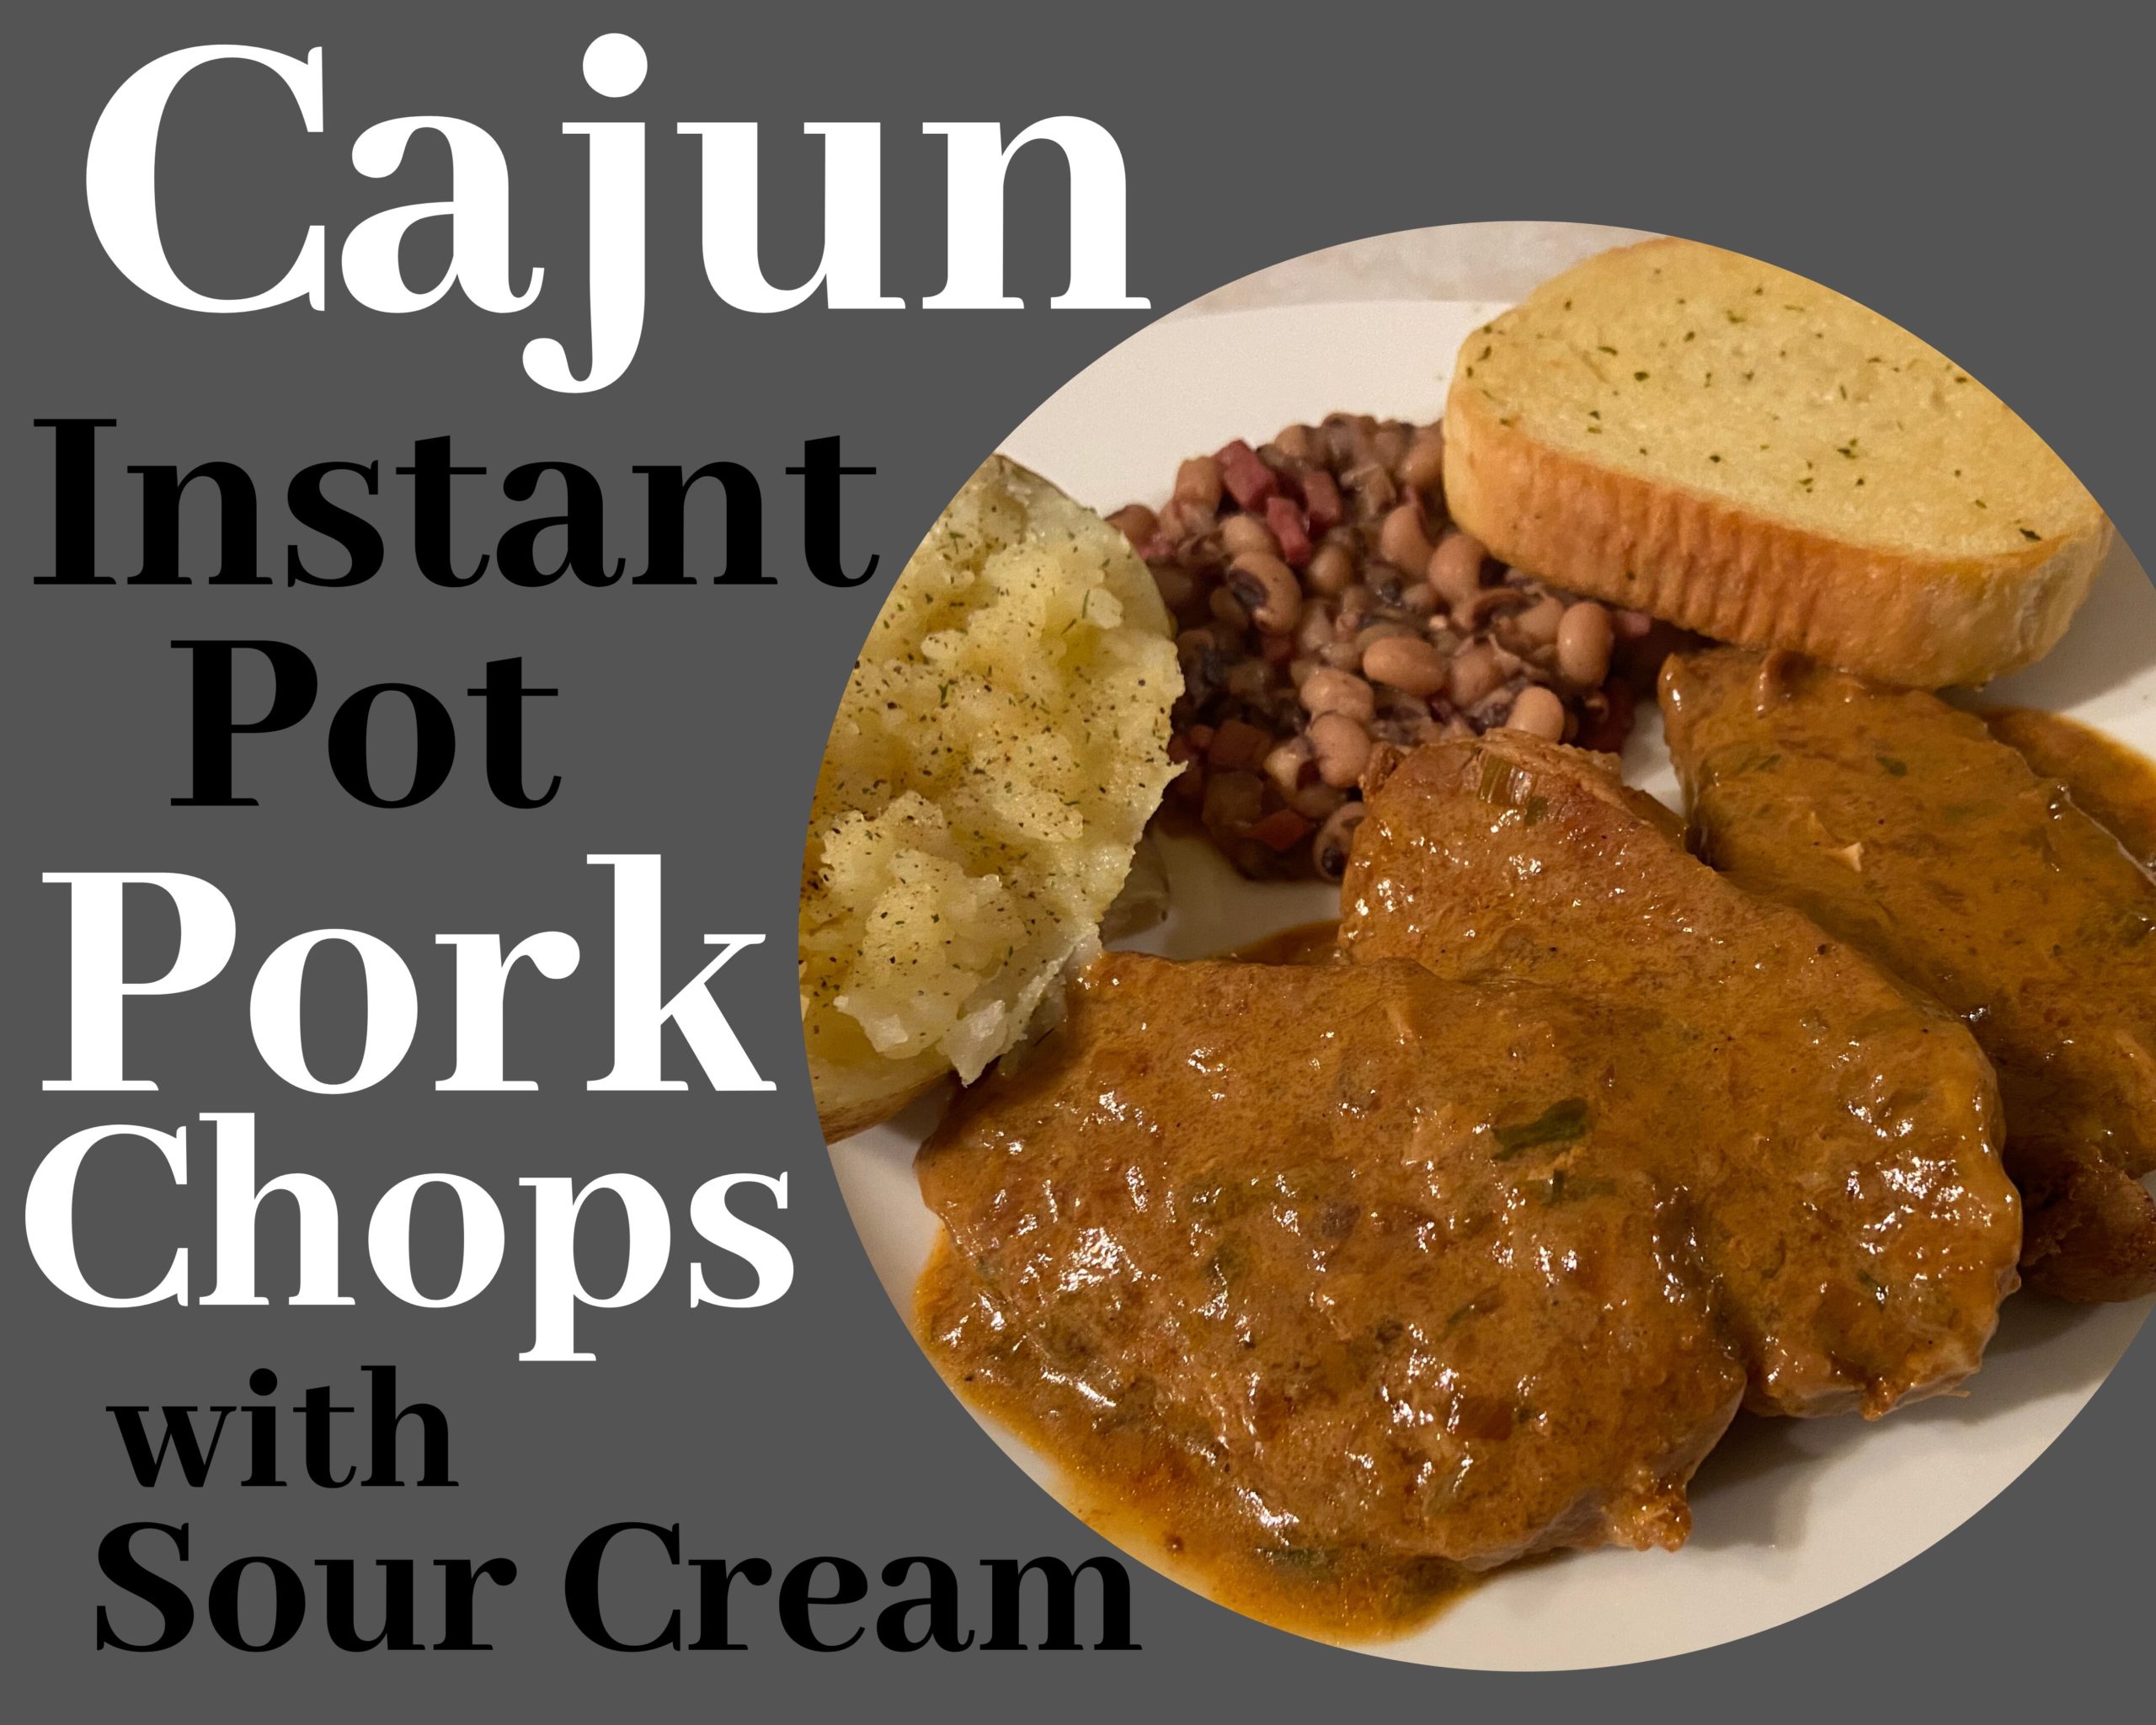 A white plate with cajun instant pot pork chops covered with gravy next to baked potatoe, black eye peas and garlic bread.